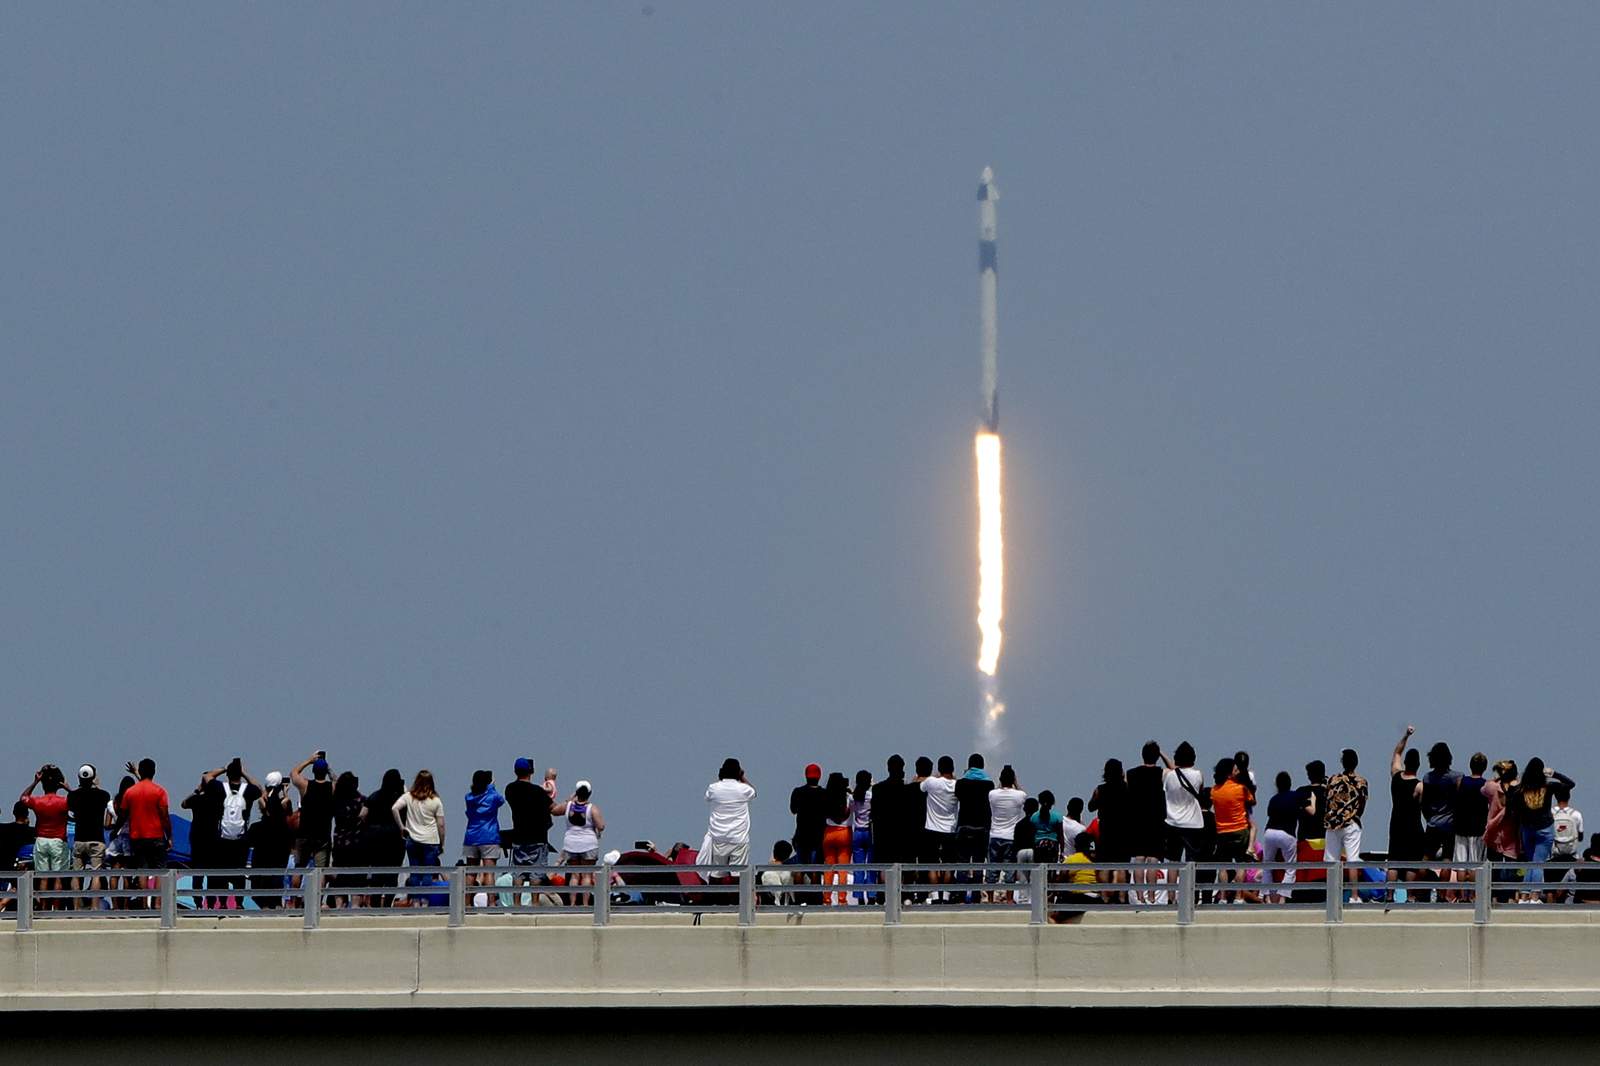 Launch gives spectators pride, reprieve from troubled times